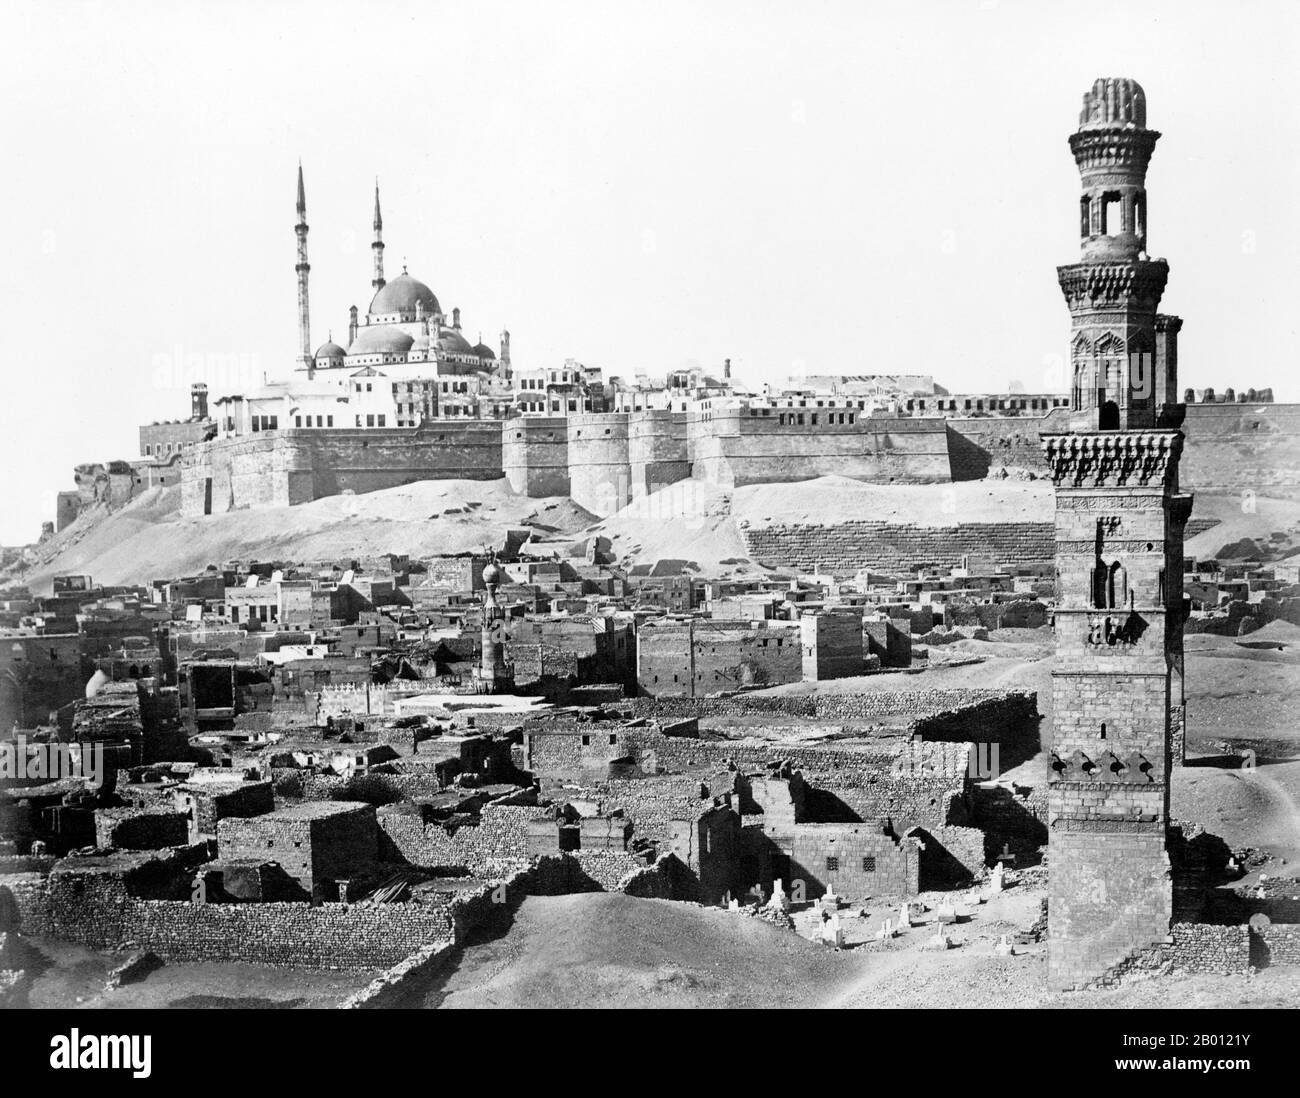 Egypt: The Saladin Citadel, Cairo (Arabic: Qala 'at Salah ad-Din). Photo by Antonio Beato (1835-1906), c. 1870-1890.  The Saladin Citadel of Cairo is a medieval Islamic fortification in Cairo, Egypt. The location, part of the Muqattam hill near the center of Cairo, was once famous for its fresh breeze and grand views of the city. It is now a preserved historic site, with mosques and museums.The Citadel was fortified by the Ayyubid ruler Salah al-Din (Saladin) between 1176 and 1183 CE, to protect it from the Crusaders. Stock Photo